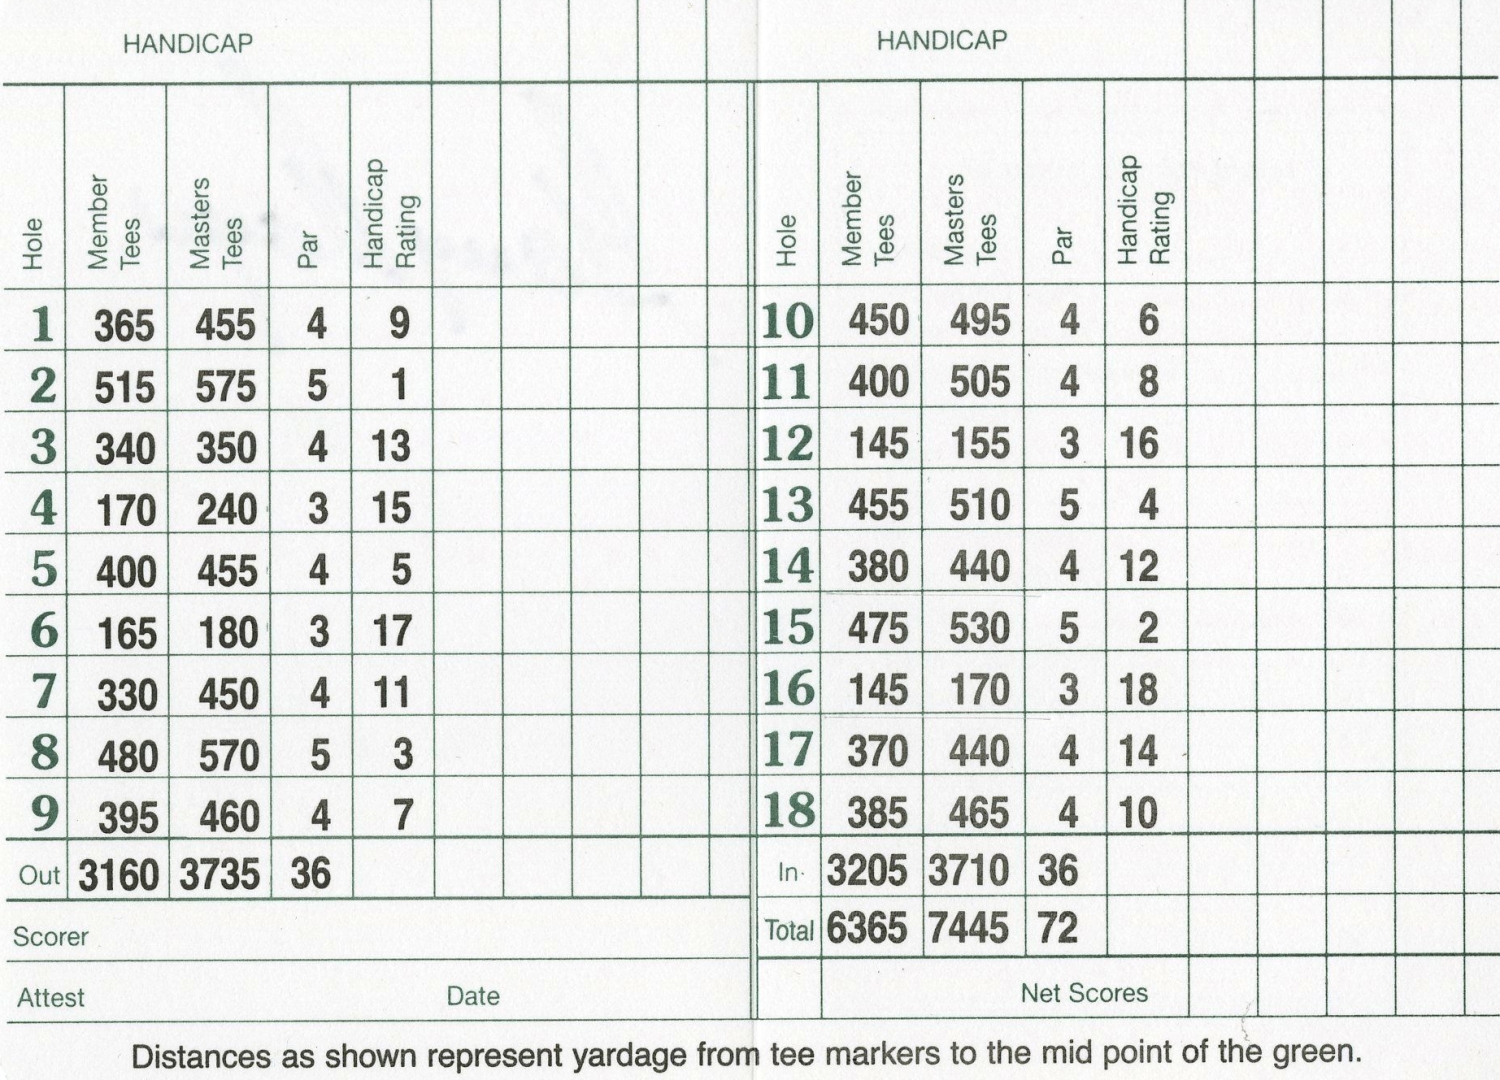 Augusta National Scorecard Hole Names, Yards, Pars and More